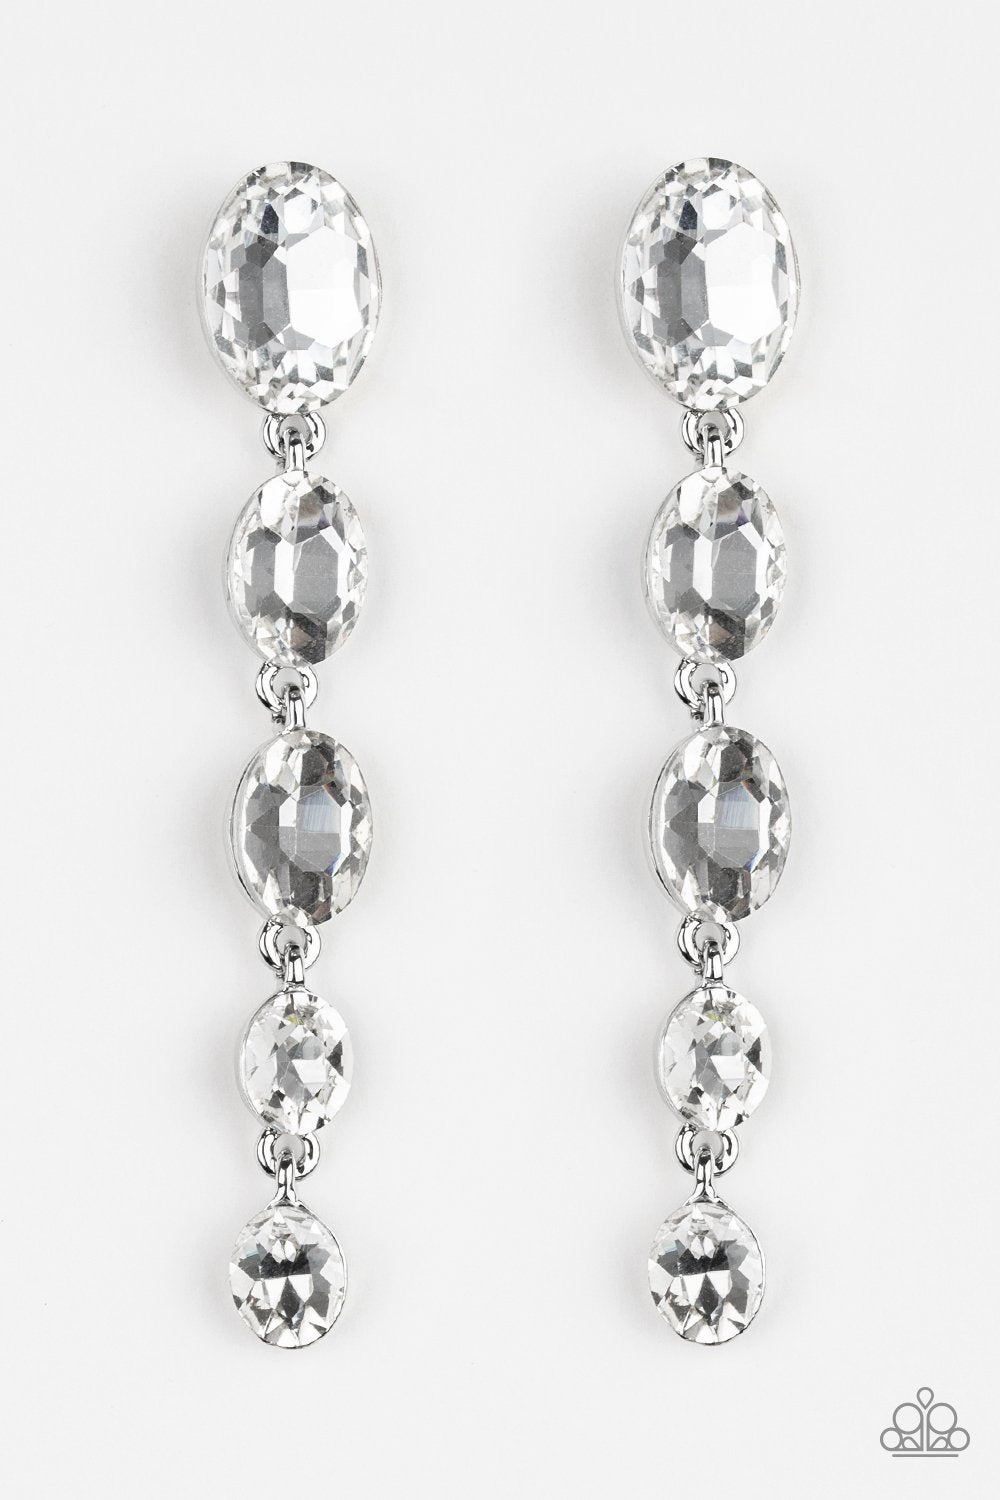 Red Carpet Radiance - White Earrings - Paparazzi Accessories